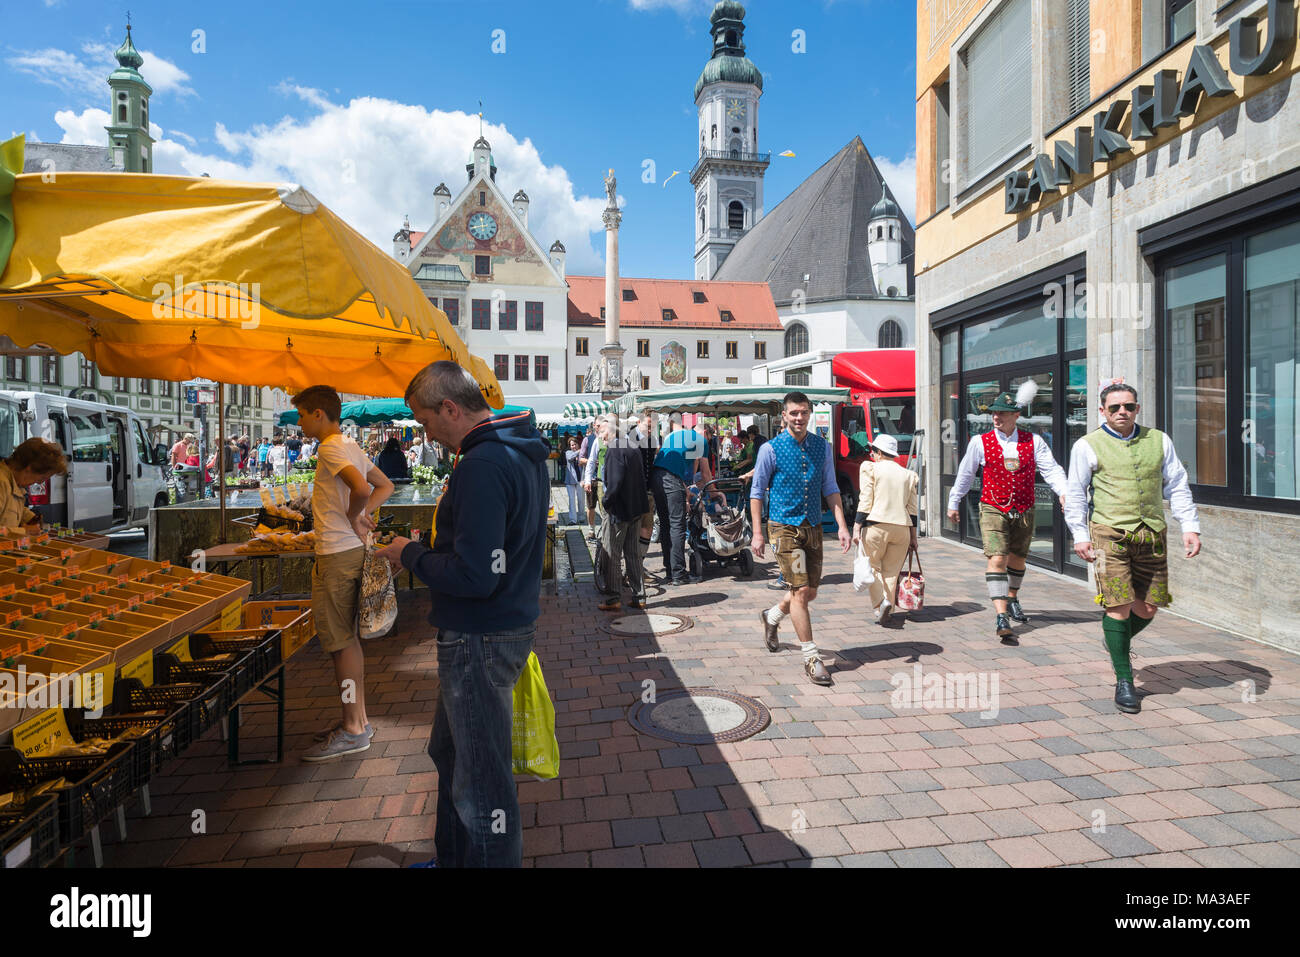 Men in Bavarian dress walk on the busy market in front of the town hall and the church in the old town of Freising, Bavaria, Germany Stock Photo